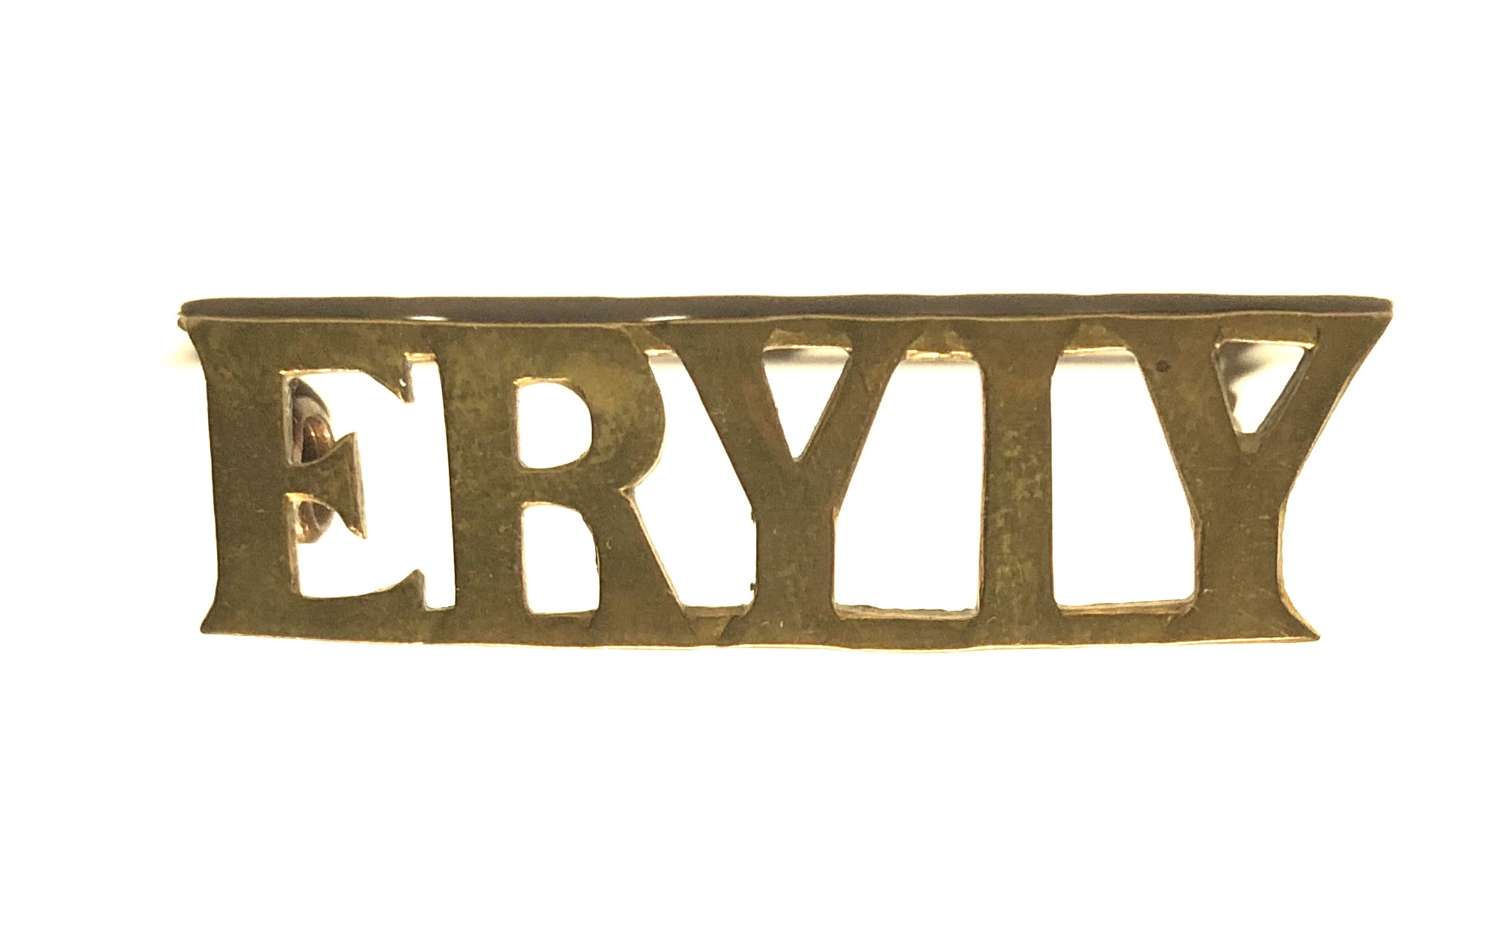 ERYIY East Riding of Yorkshire Imperial Yeomanry shoulder title